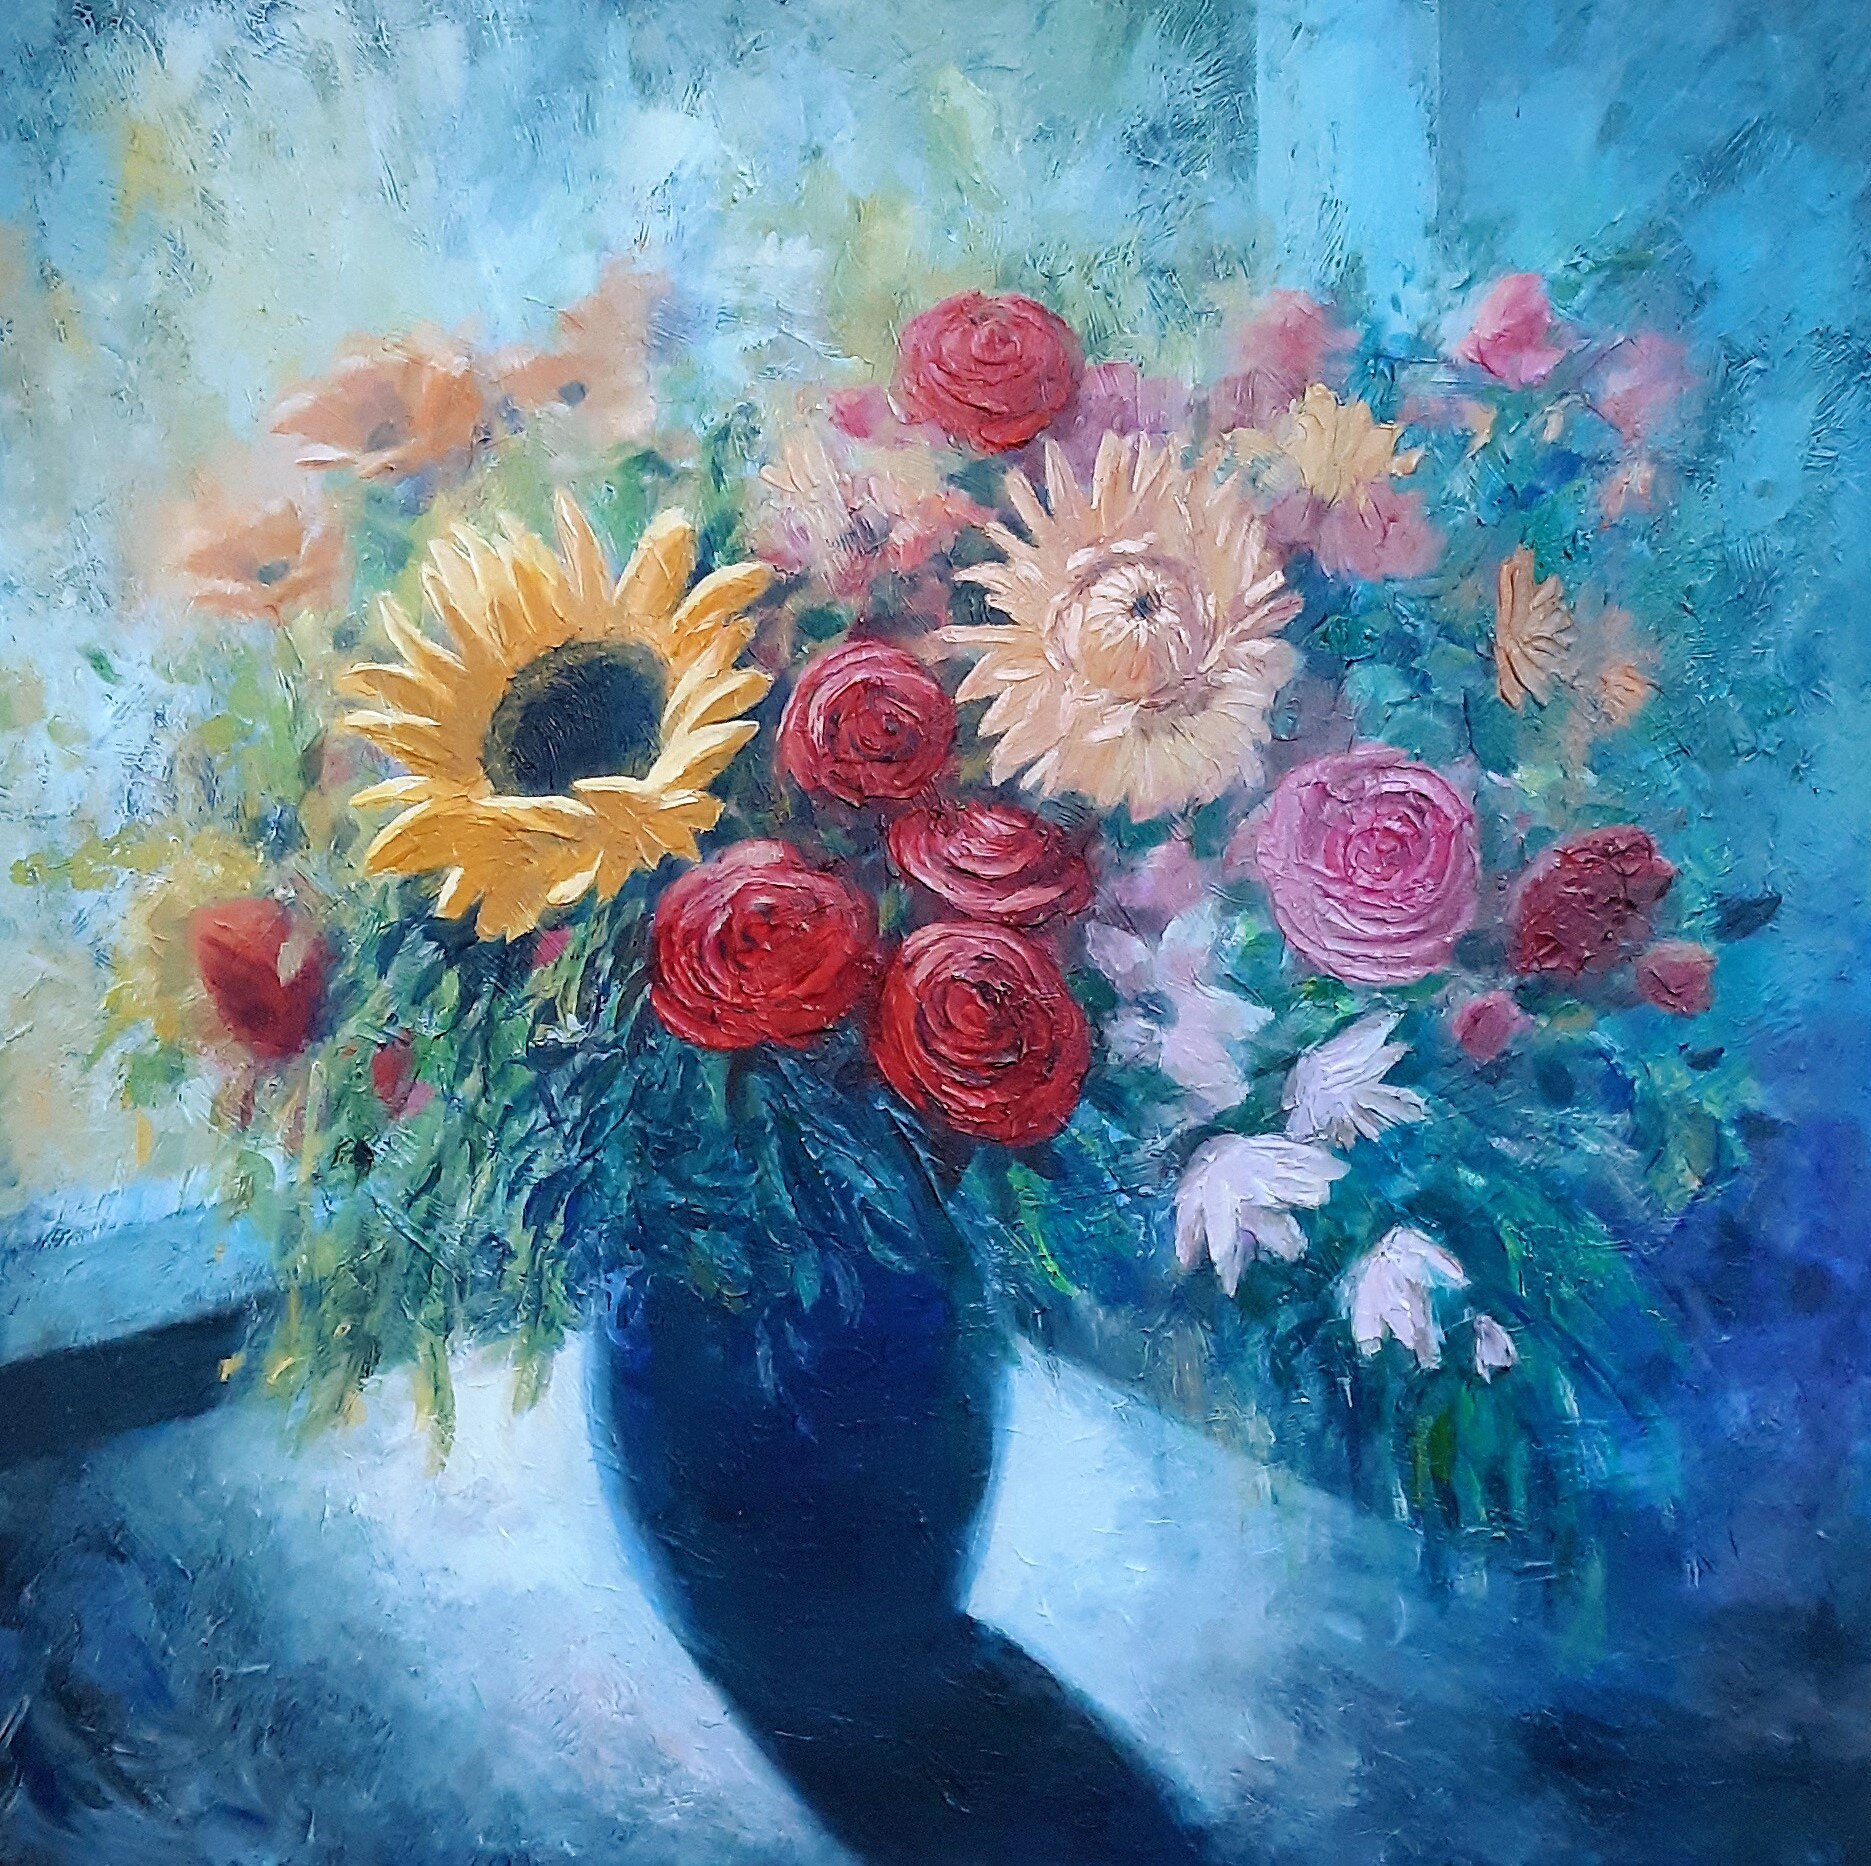 SOLD, Flowers in the Window Painting, Acrylic on Canvas, Copyright 2021 Hirschten